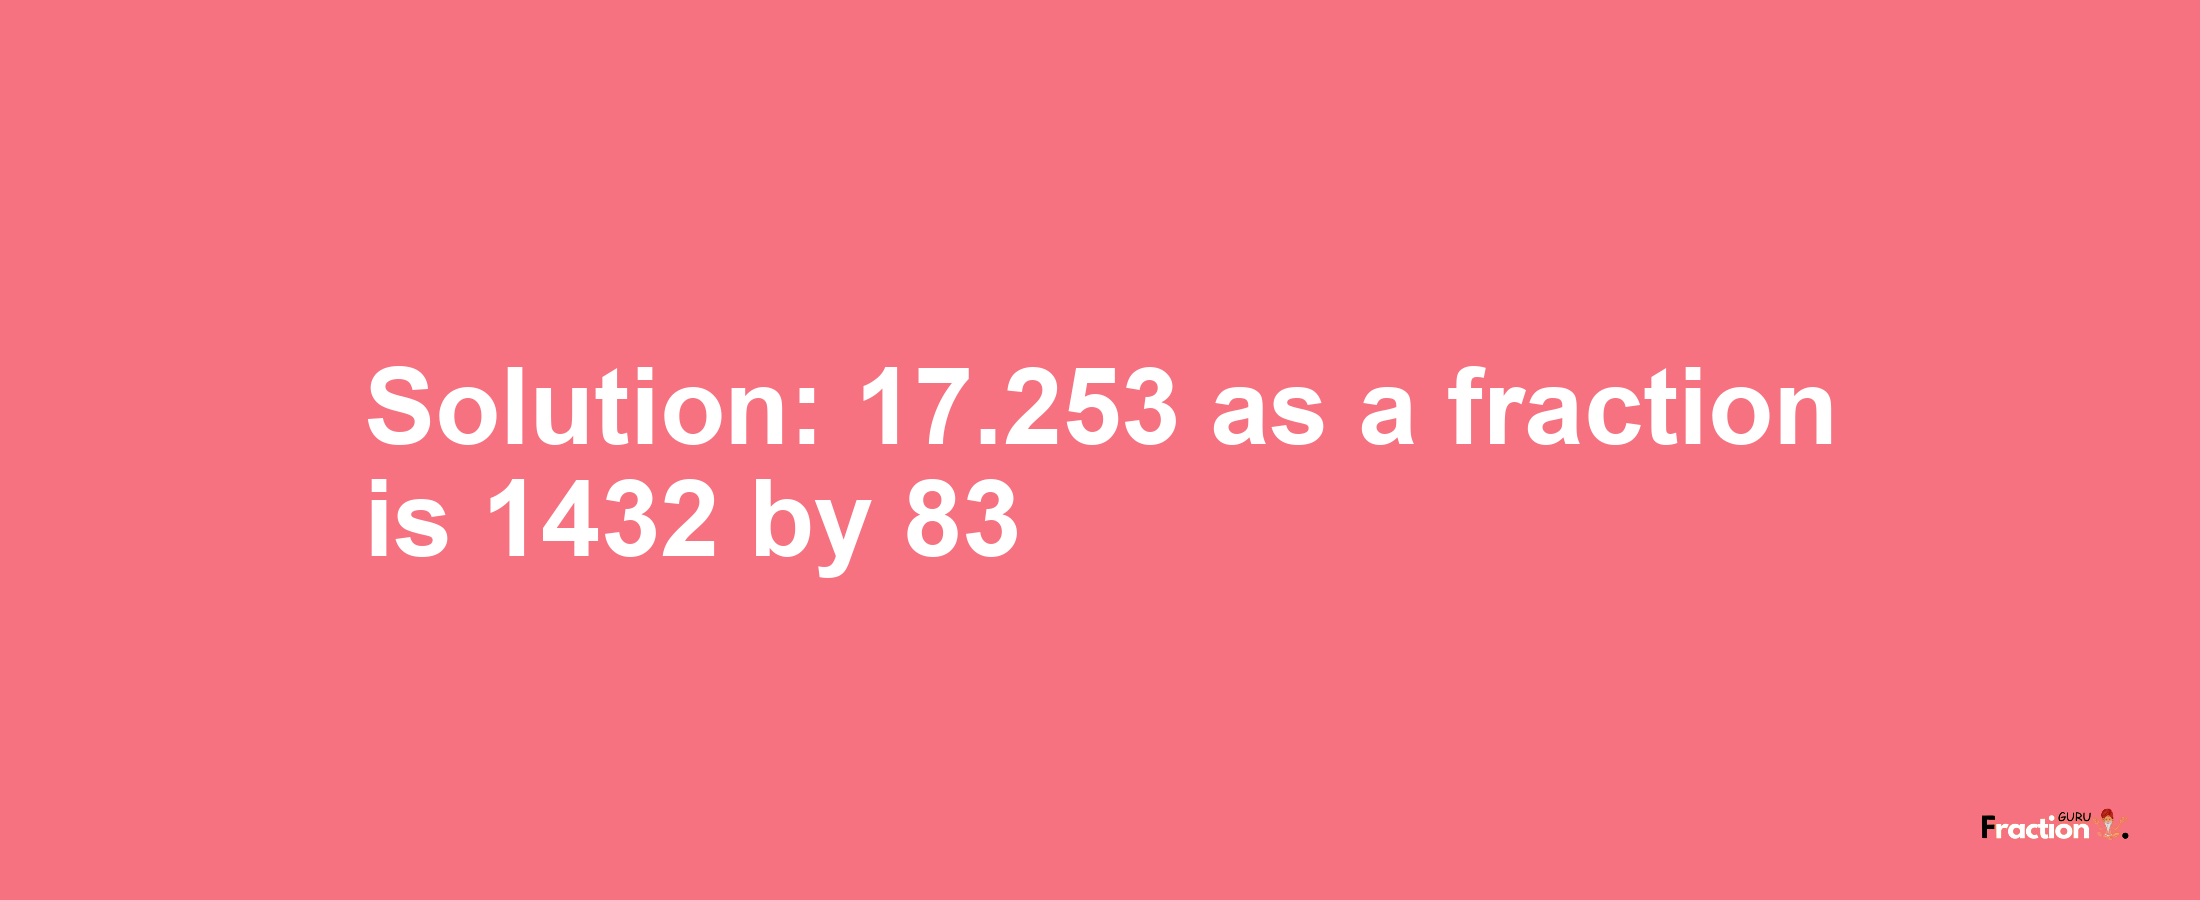 Solution:17.253 as a fraction is 1432/83